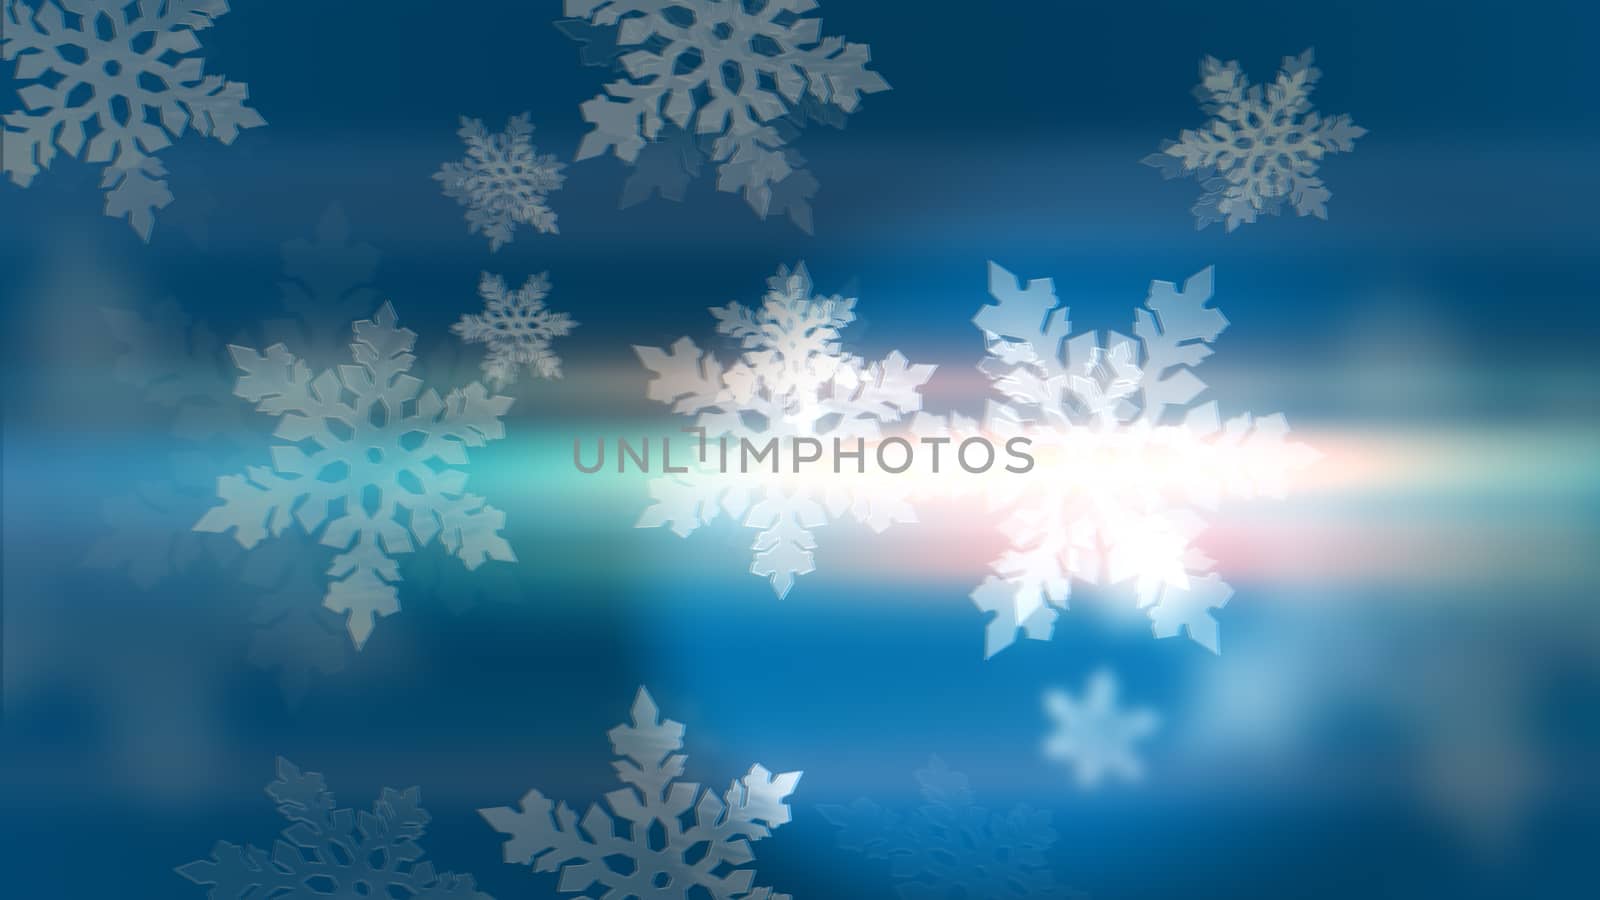 Merry Christmas! Happy New Year! Light Blue background with 3d snowflakes.